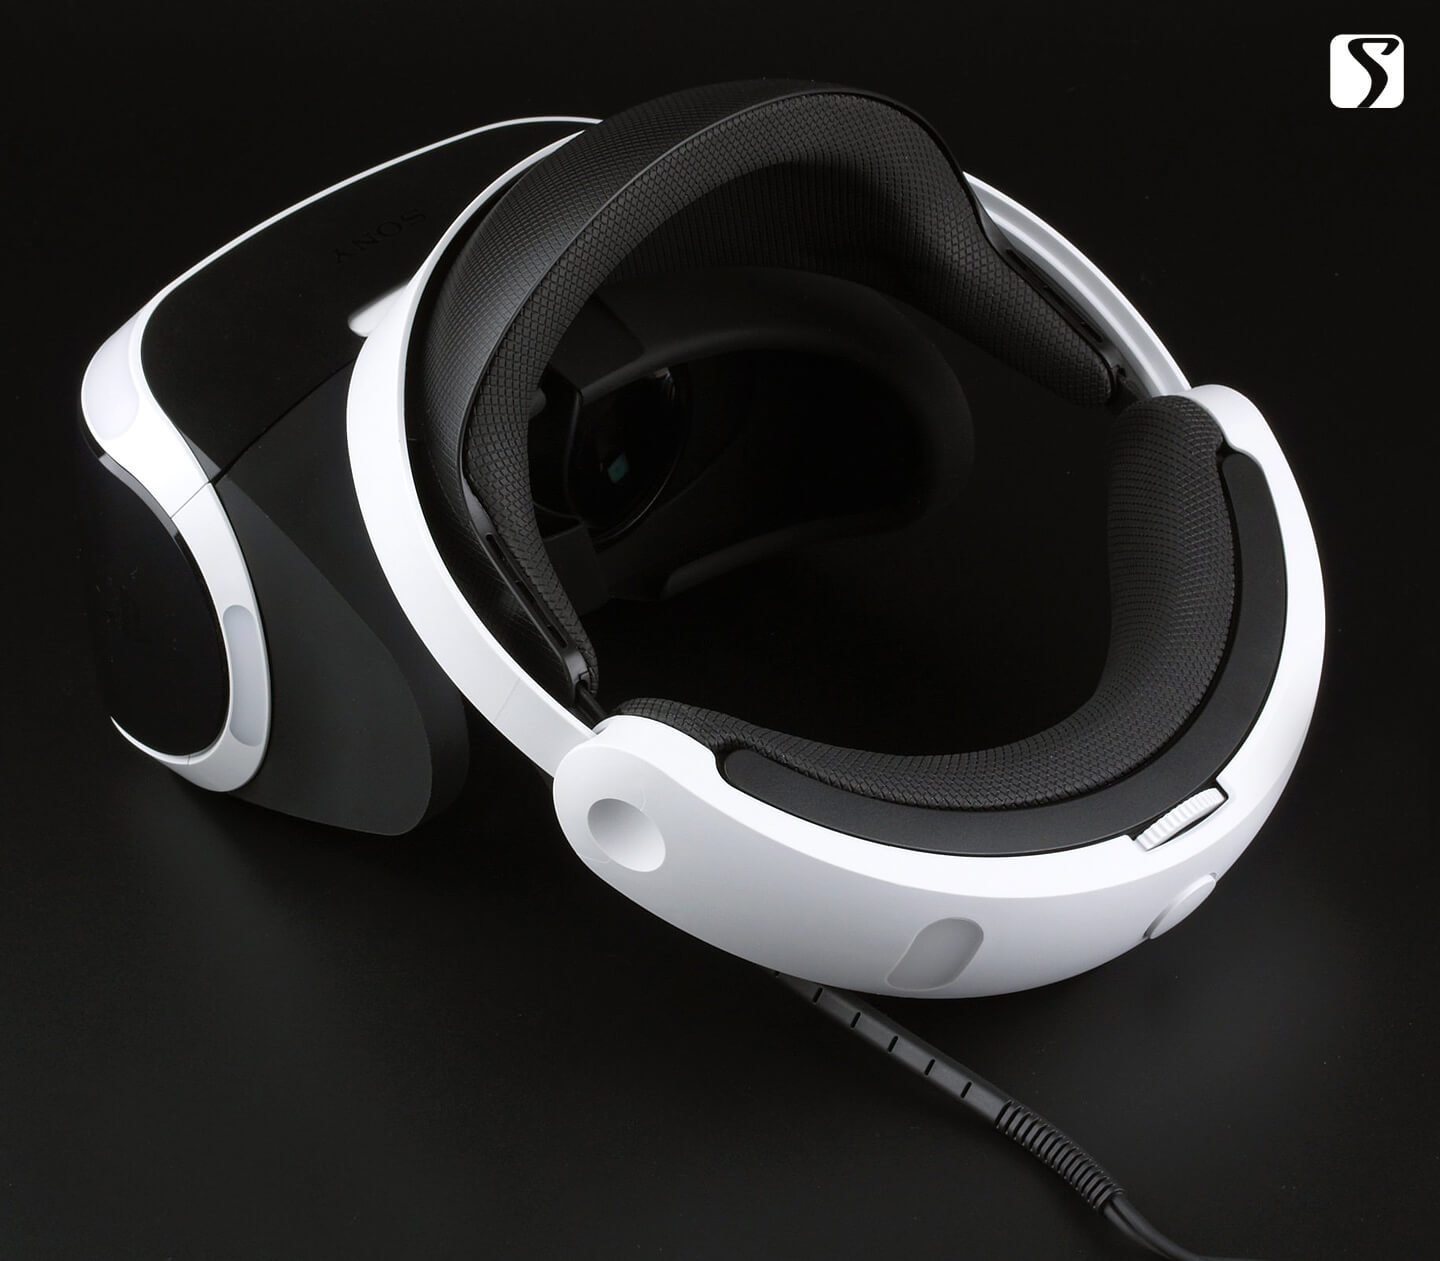 Sony PS VR headset